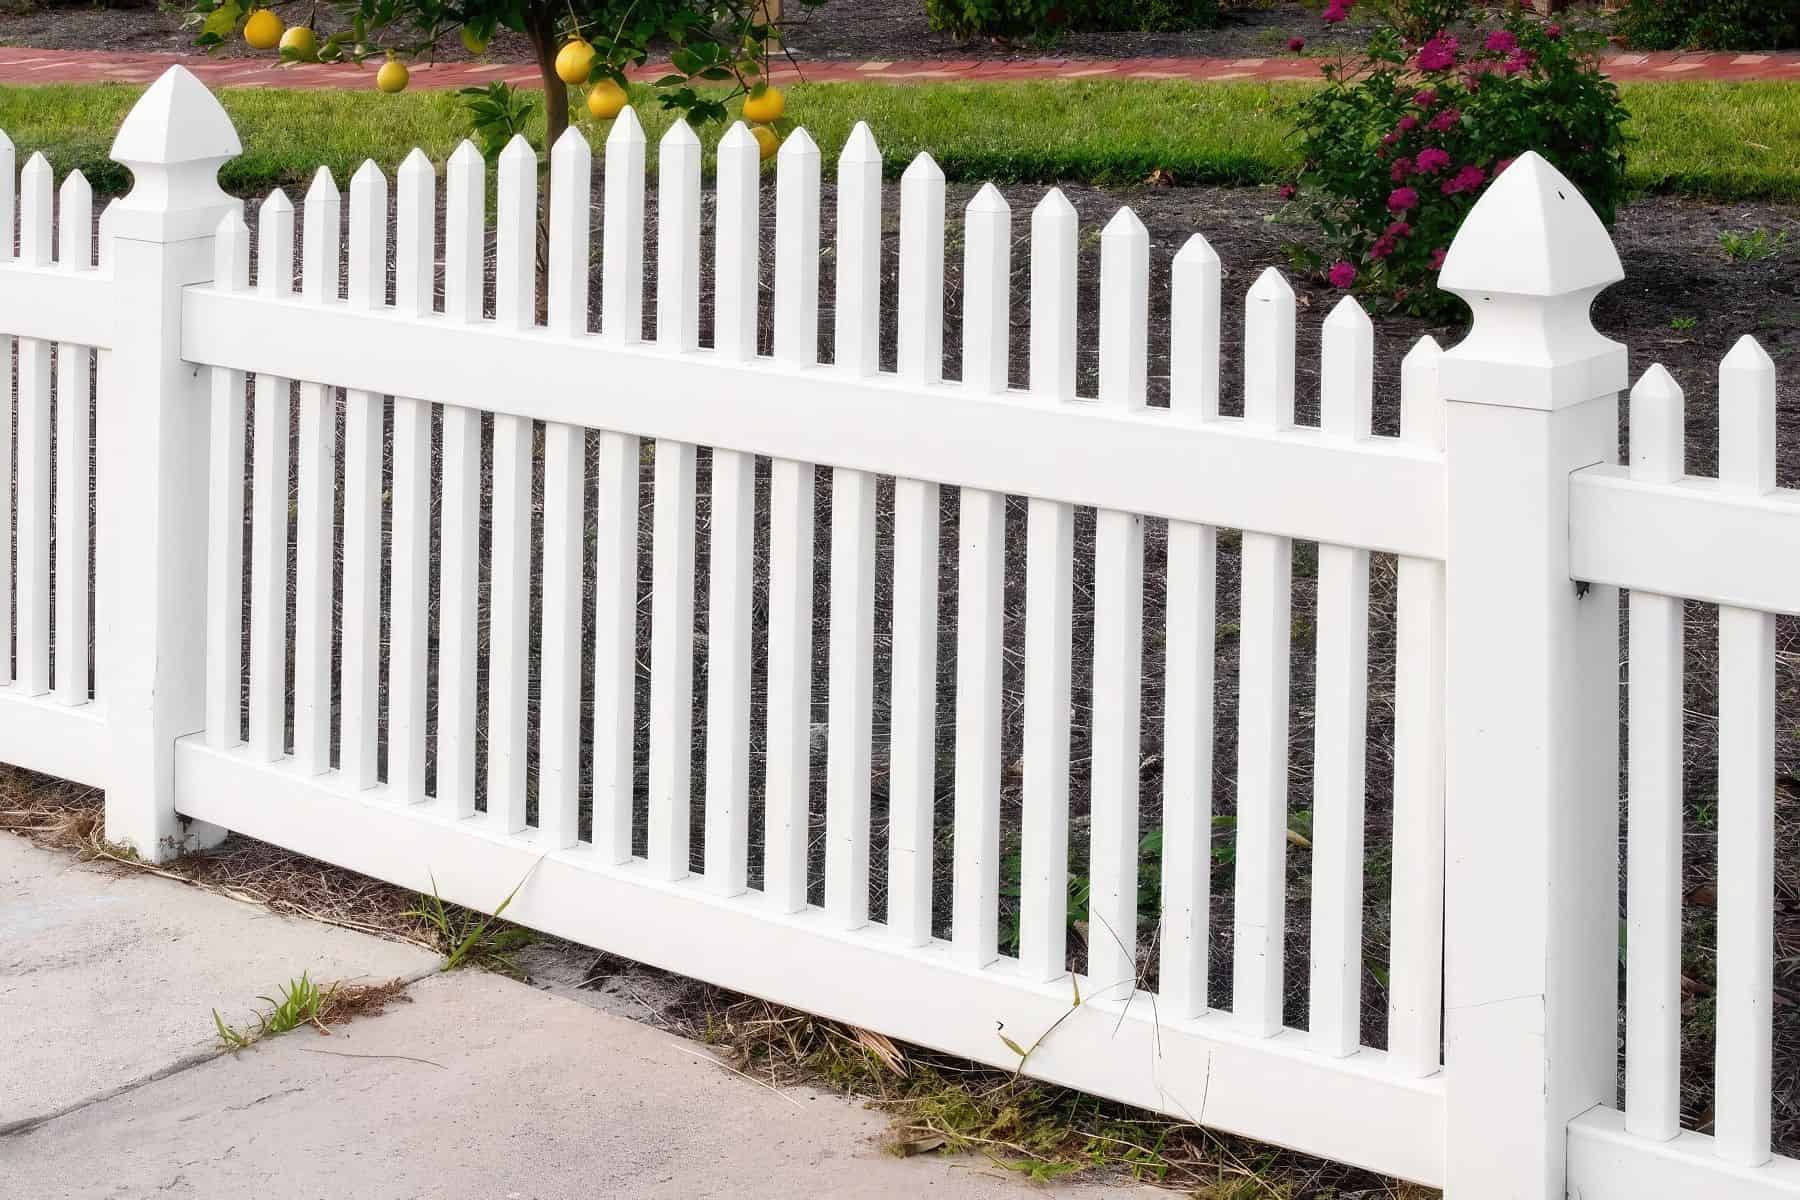 Vinyl arched picket fence borders concrete sidewalk; front lawn adorned with small plants & distant trees